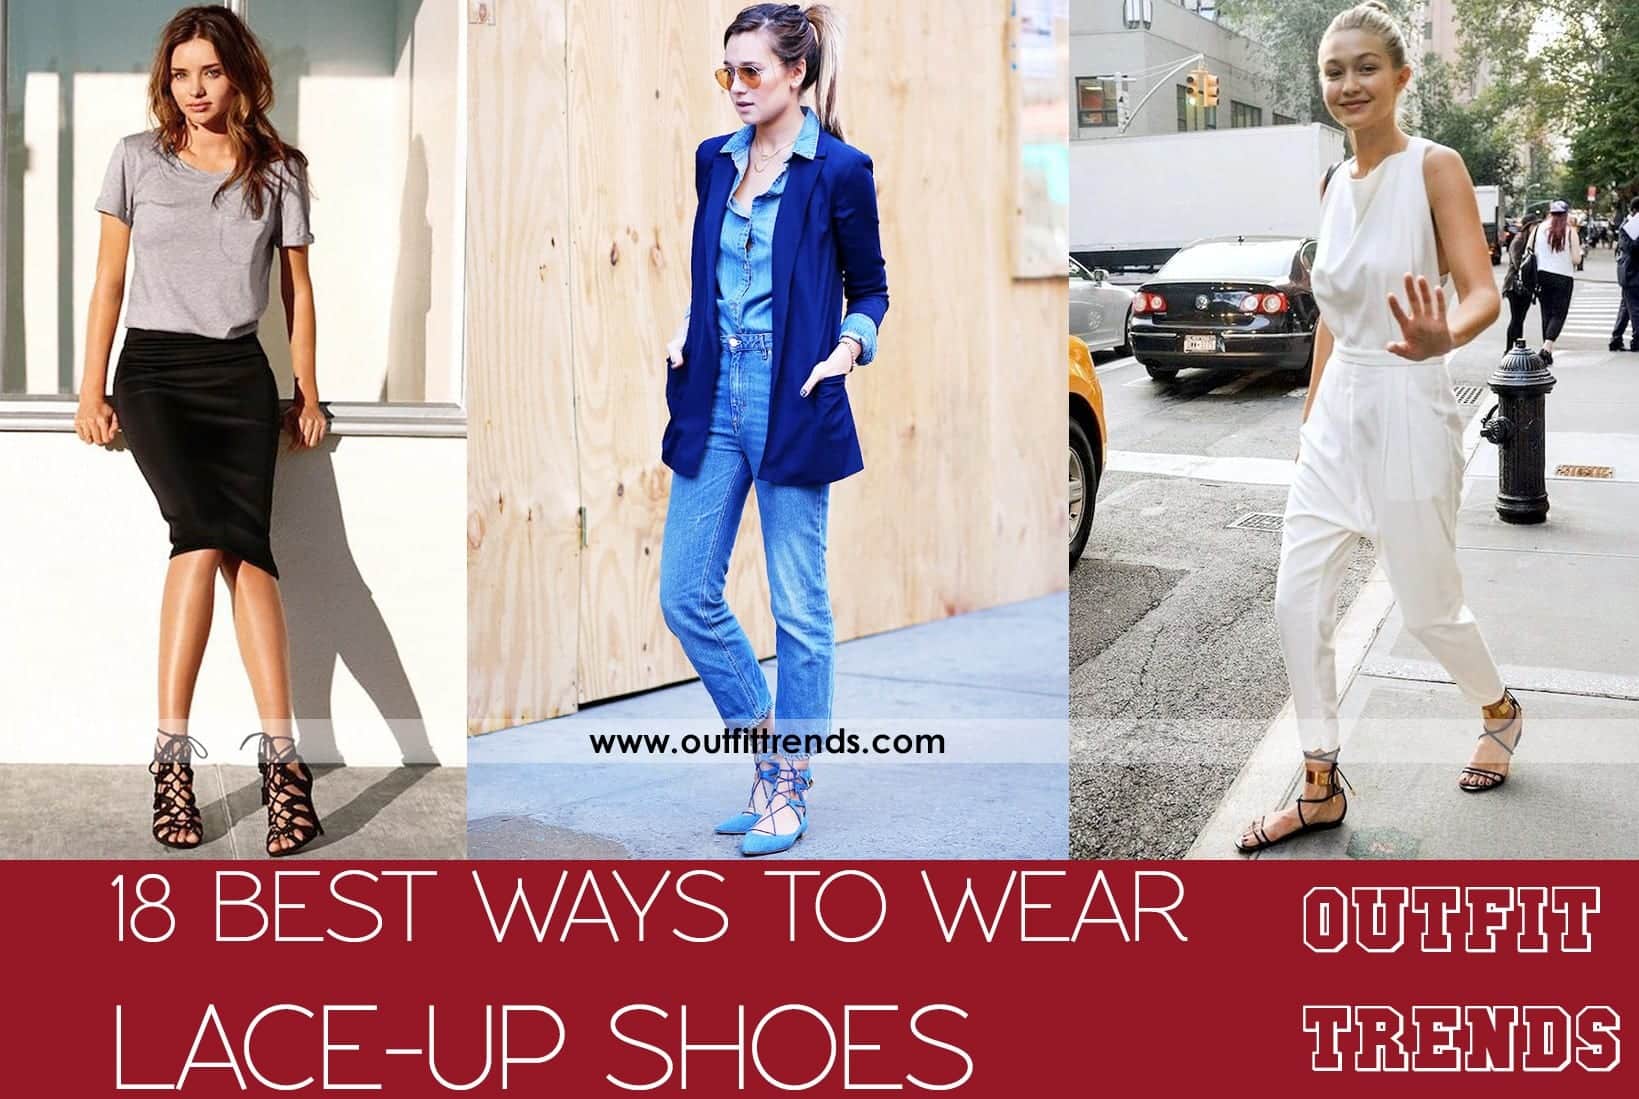 Outfits with Lace-up Shoes – 18 Ways to Wear Lace-up Shoes